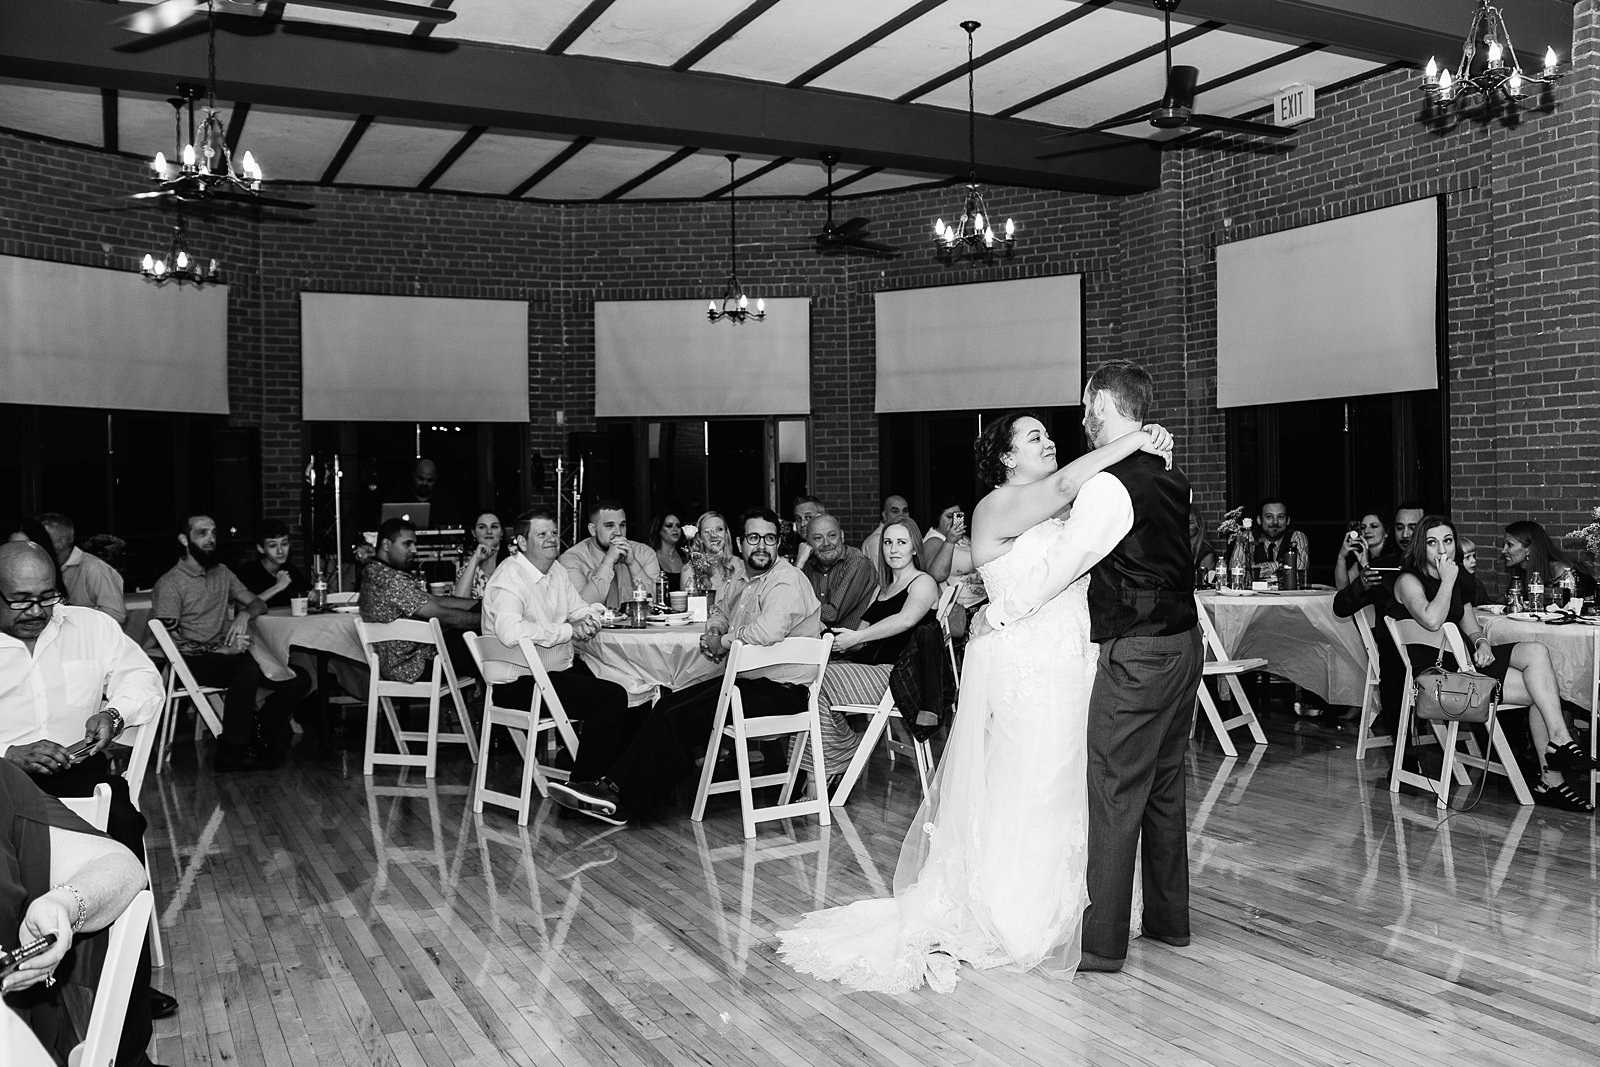 Bride and groom sharing first dance at their Encanto Park wedding reception by Arizona wedding photographer PMA Photography.